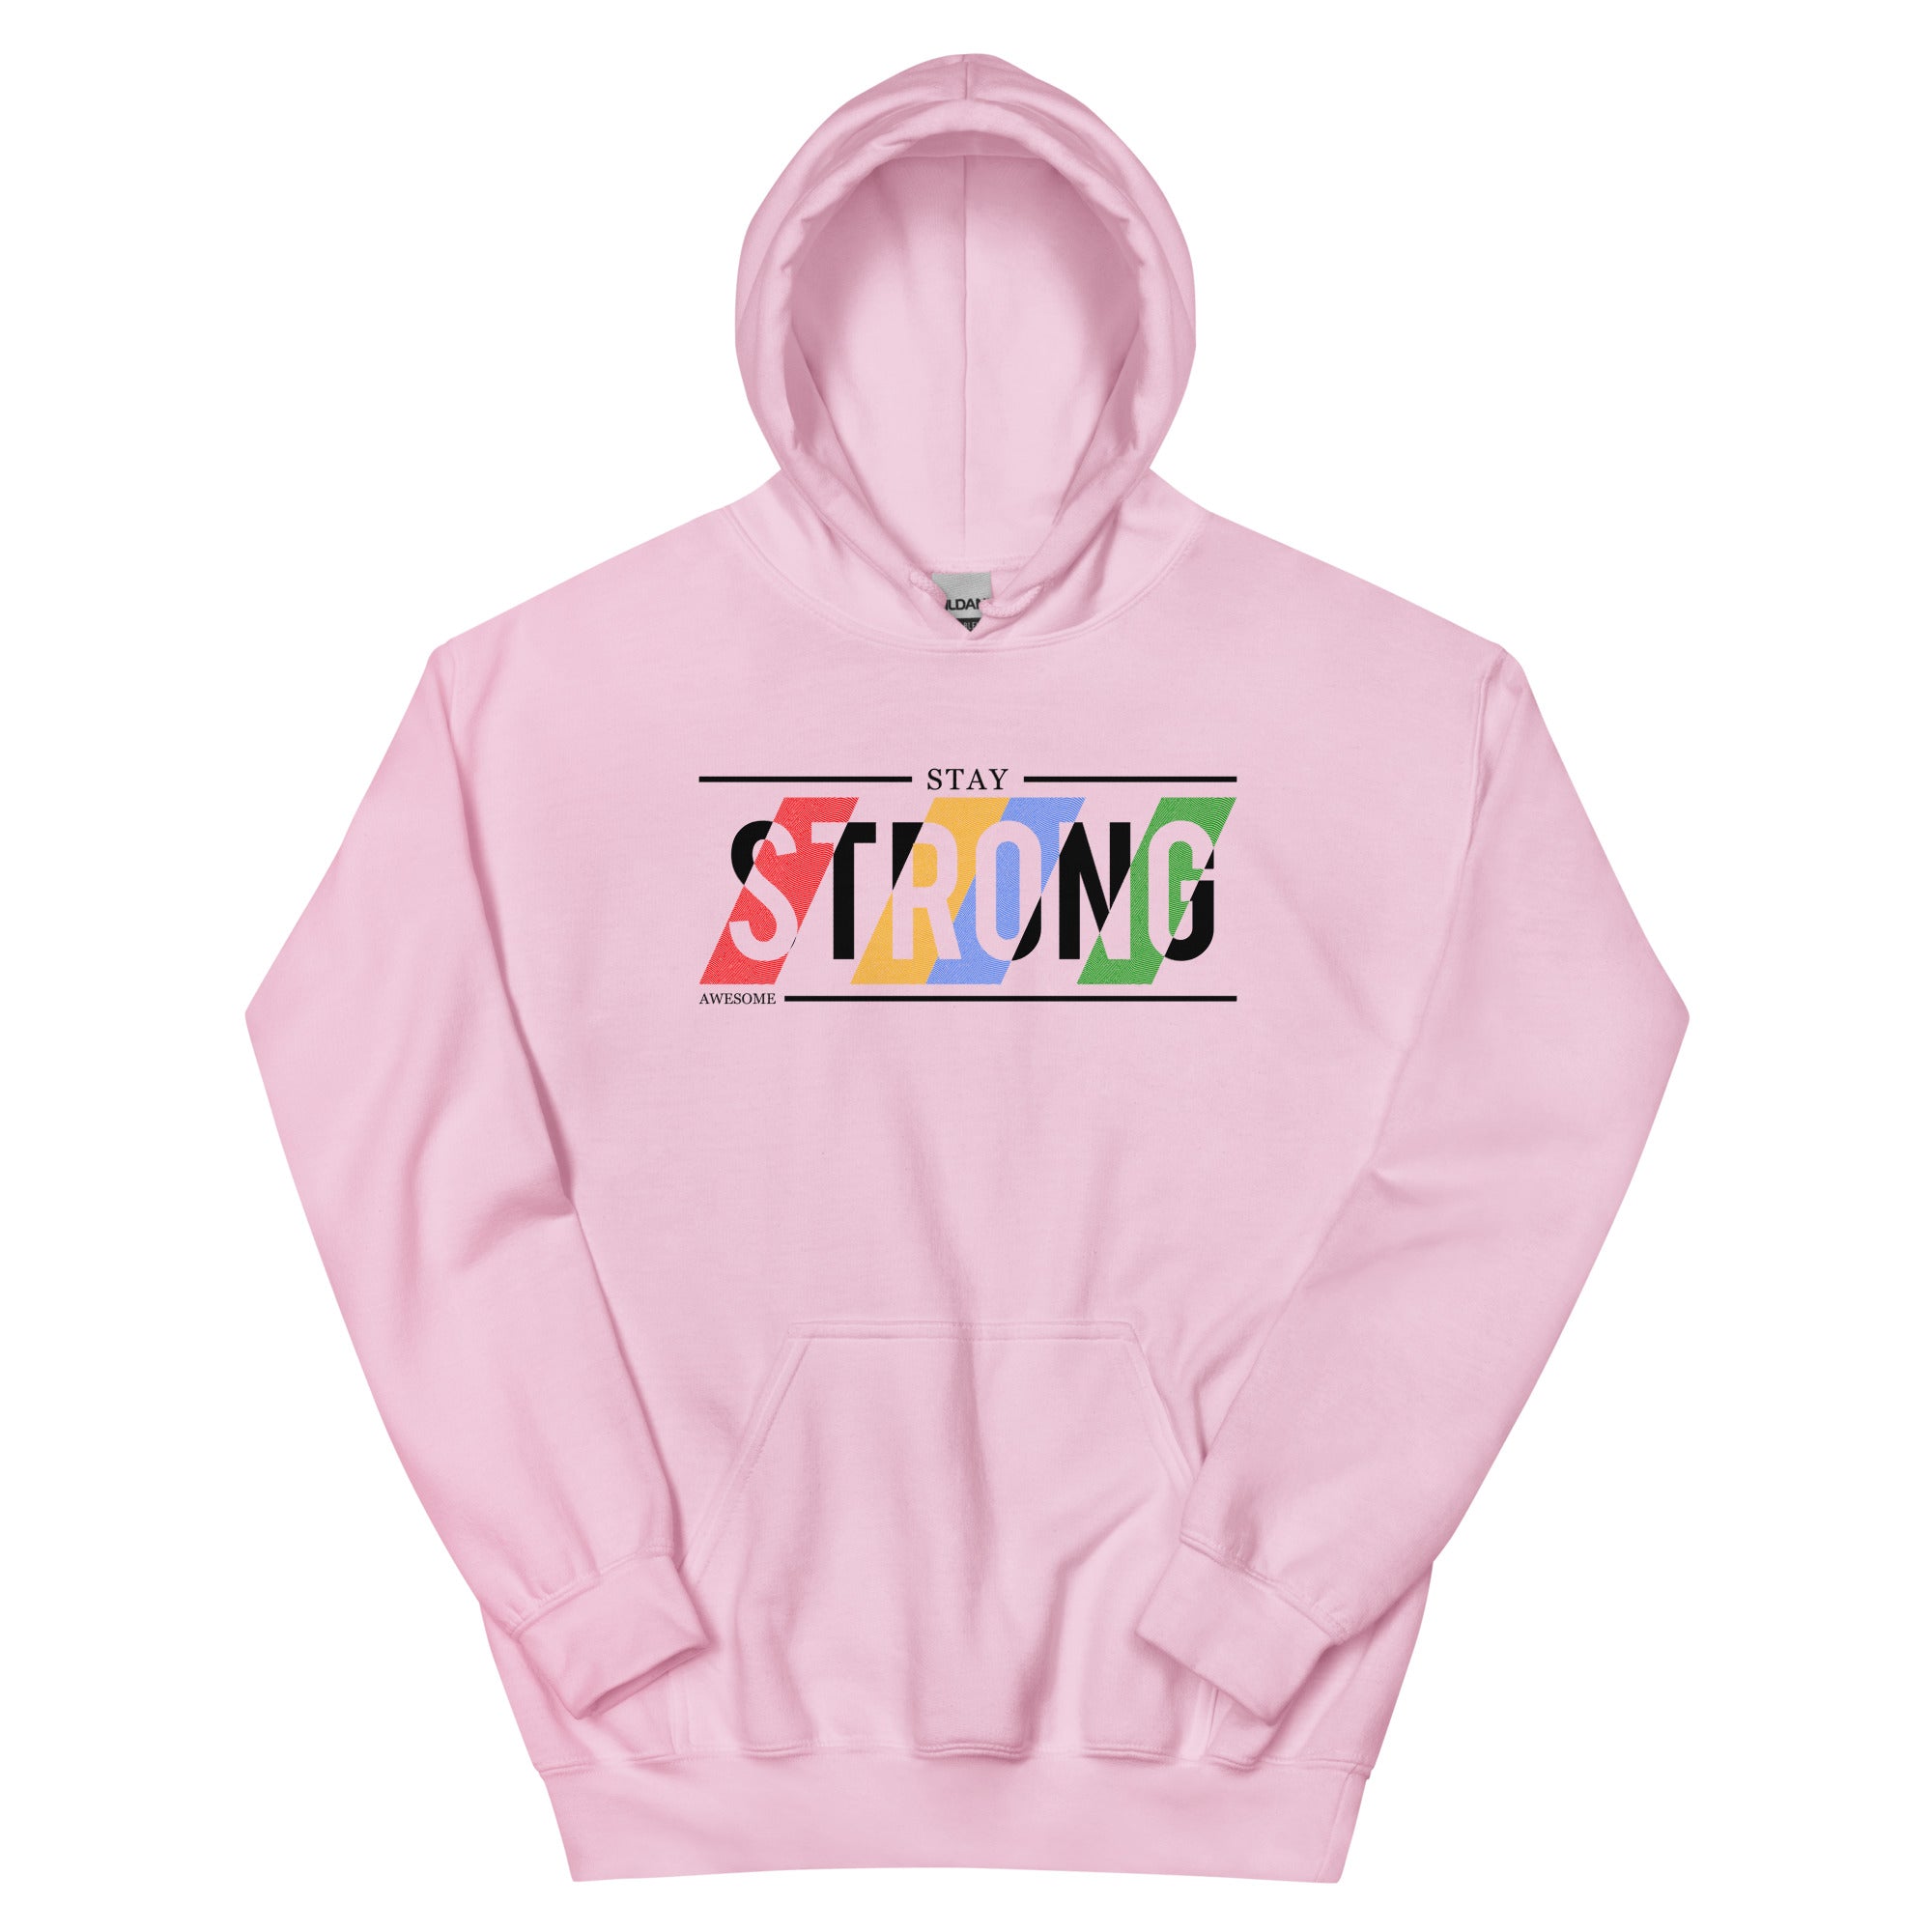 Stay Strong - Unisex Hoodie